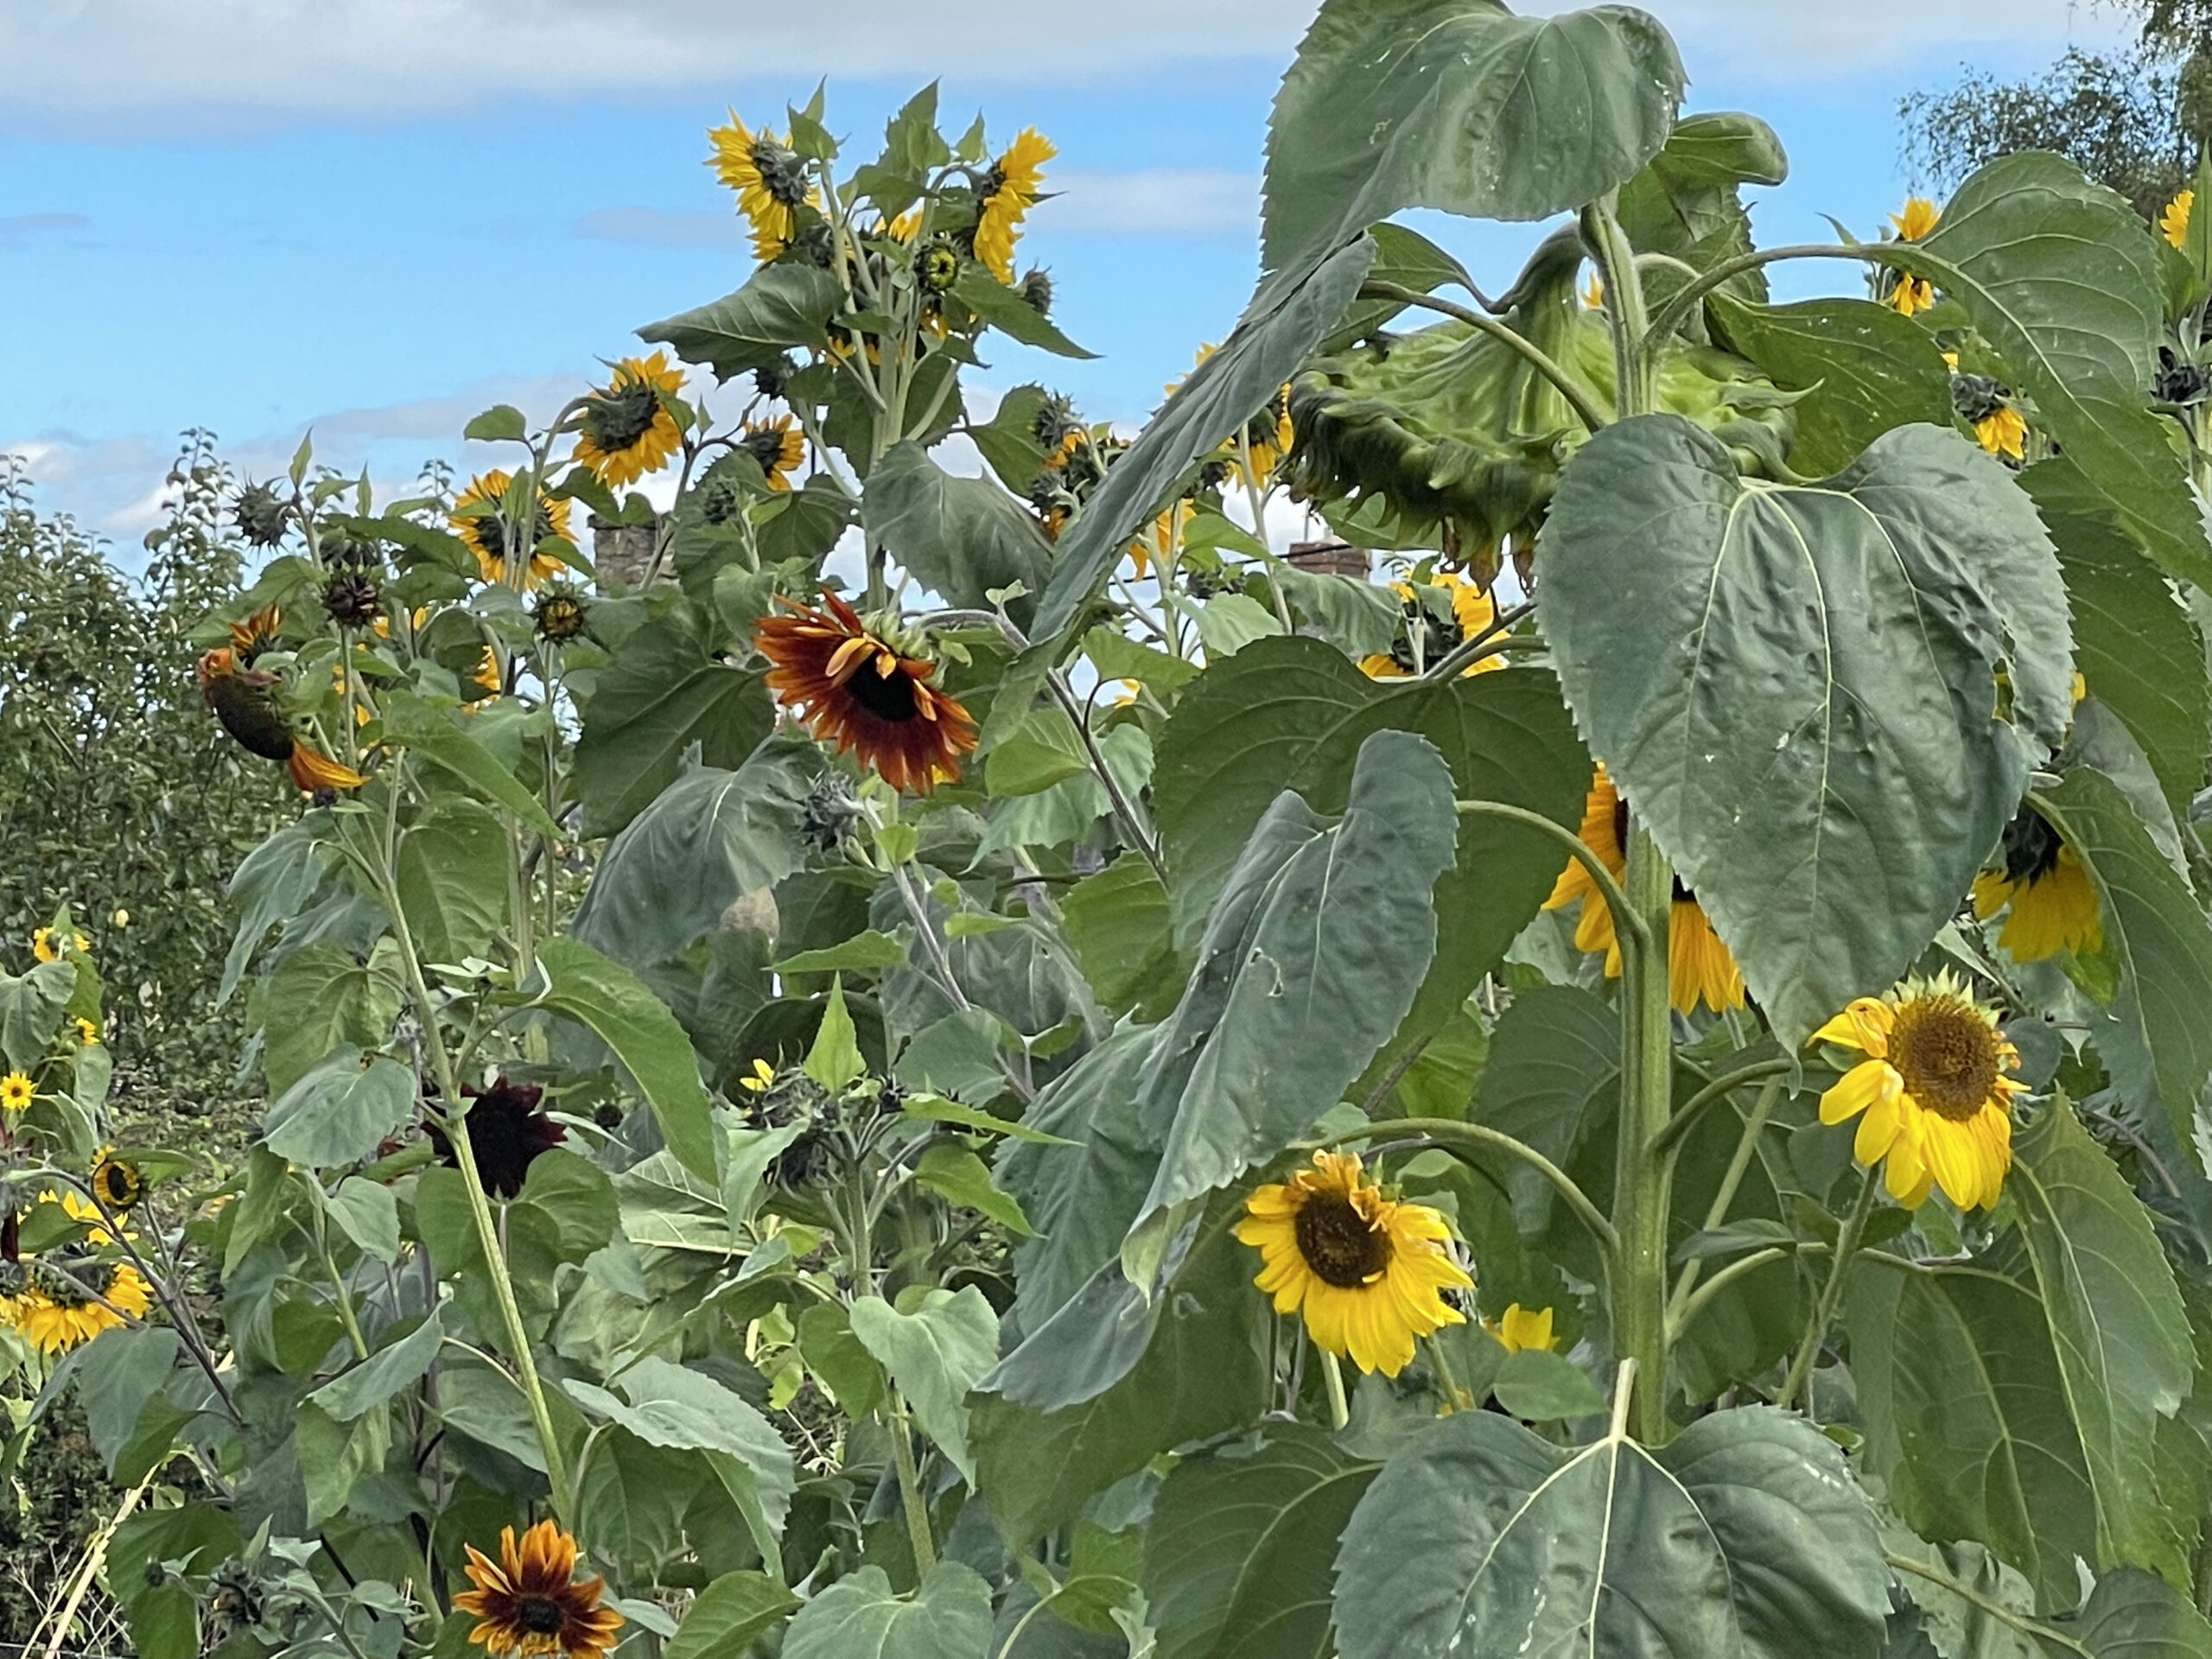 Sunflowers growing in productive fields